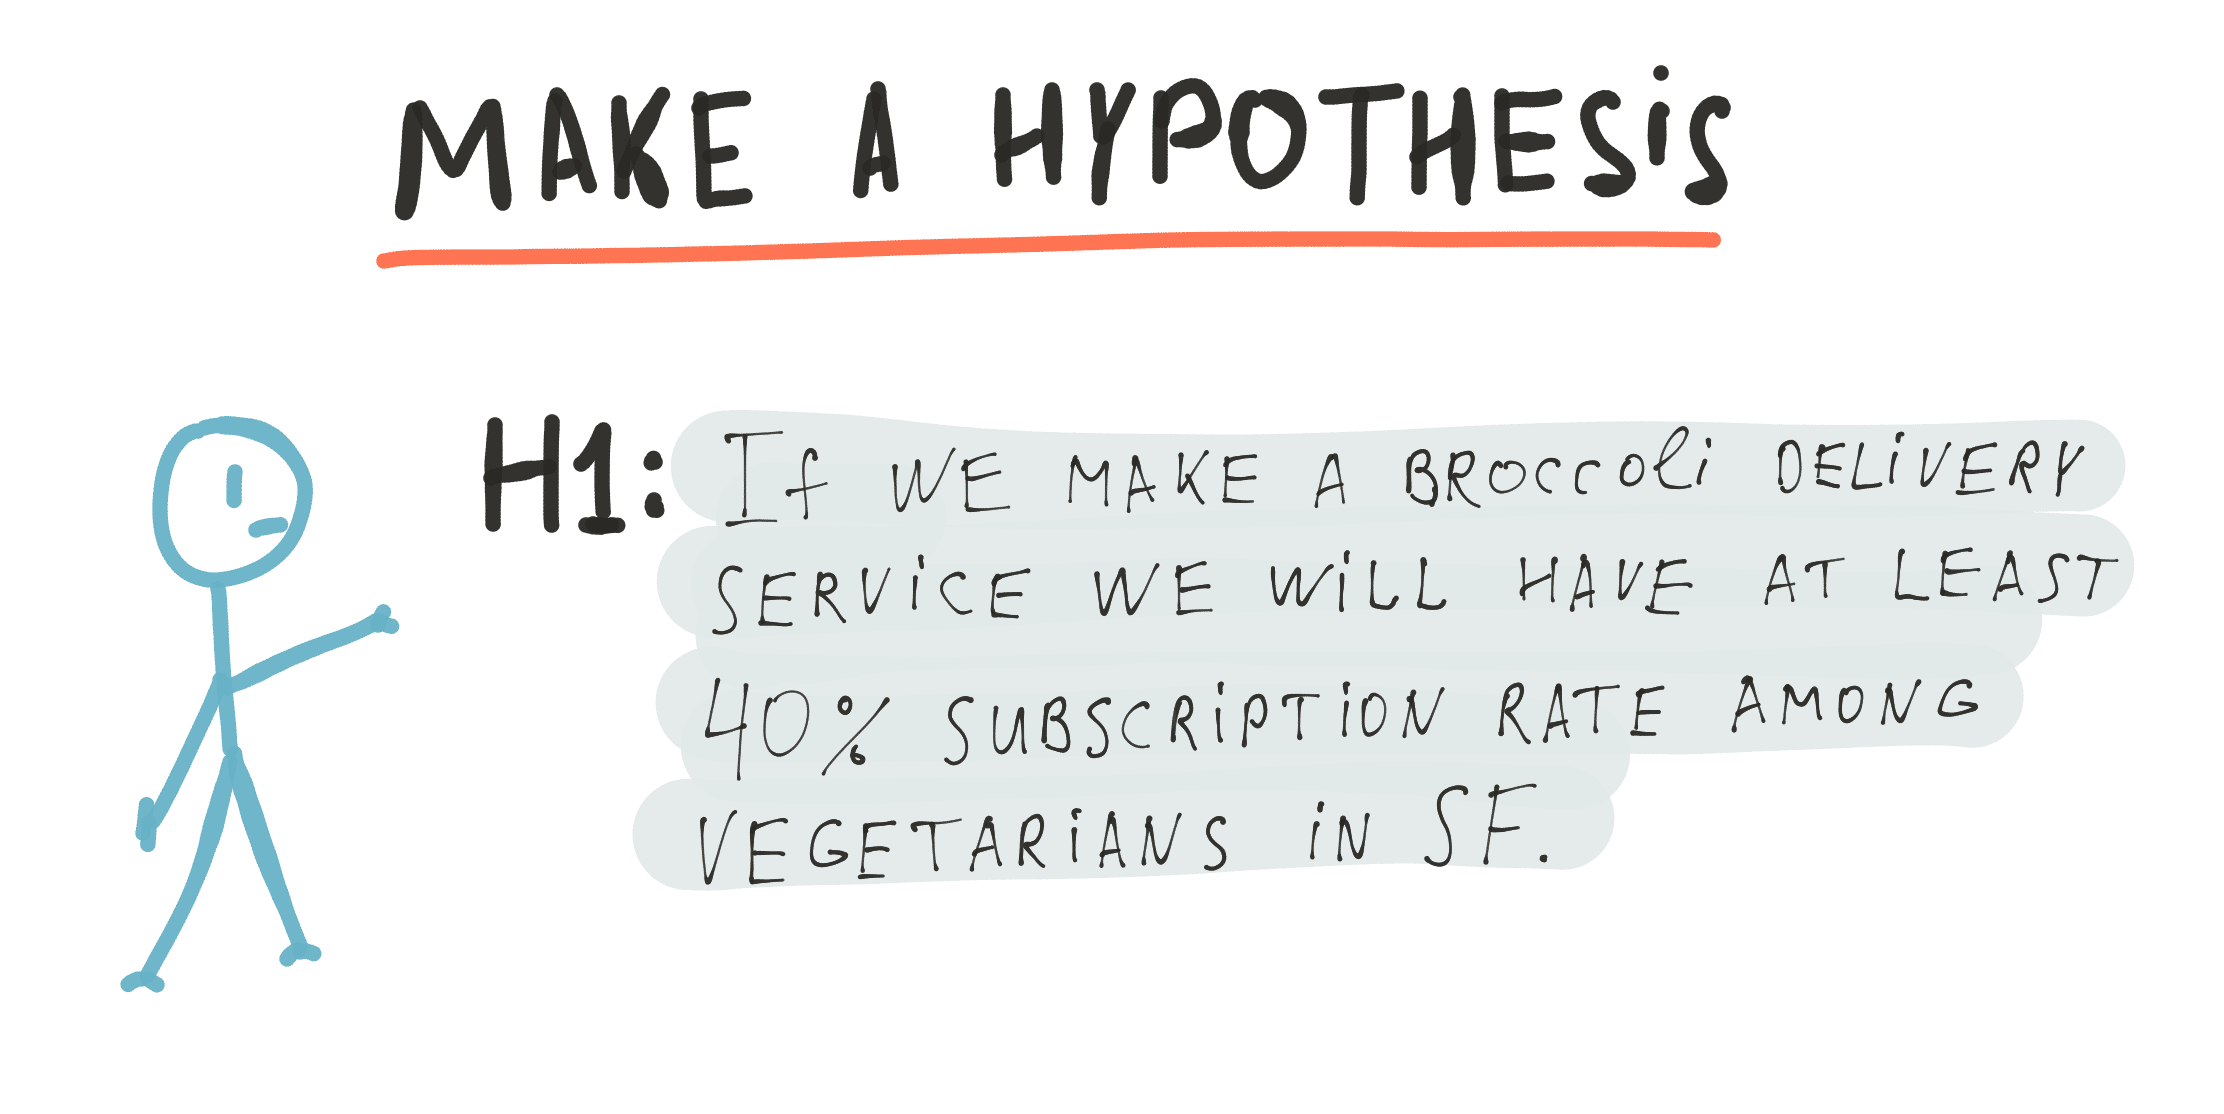 creating a hypothesis test